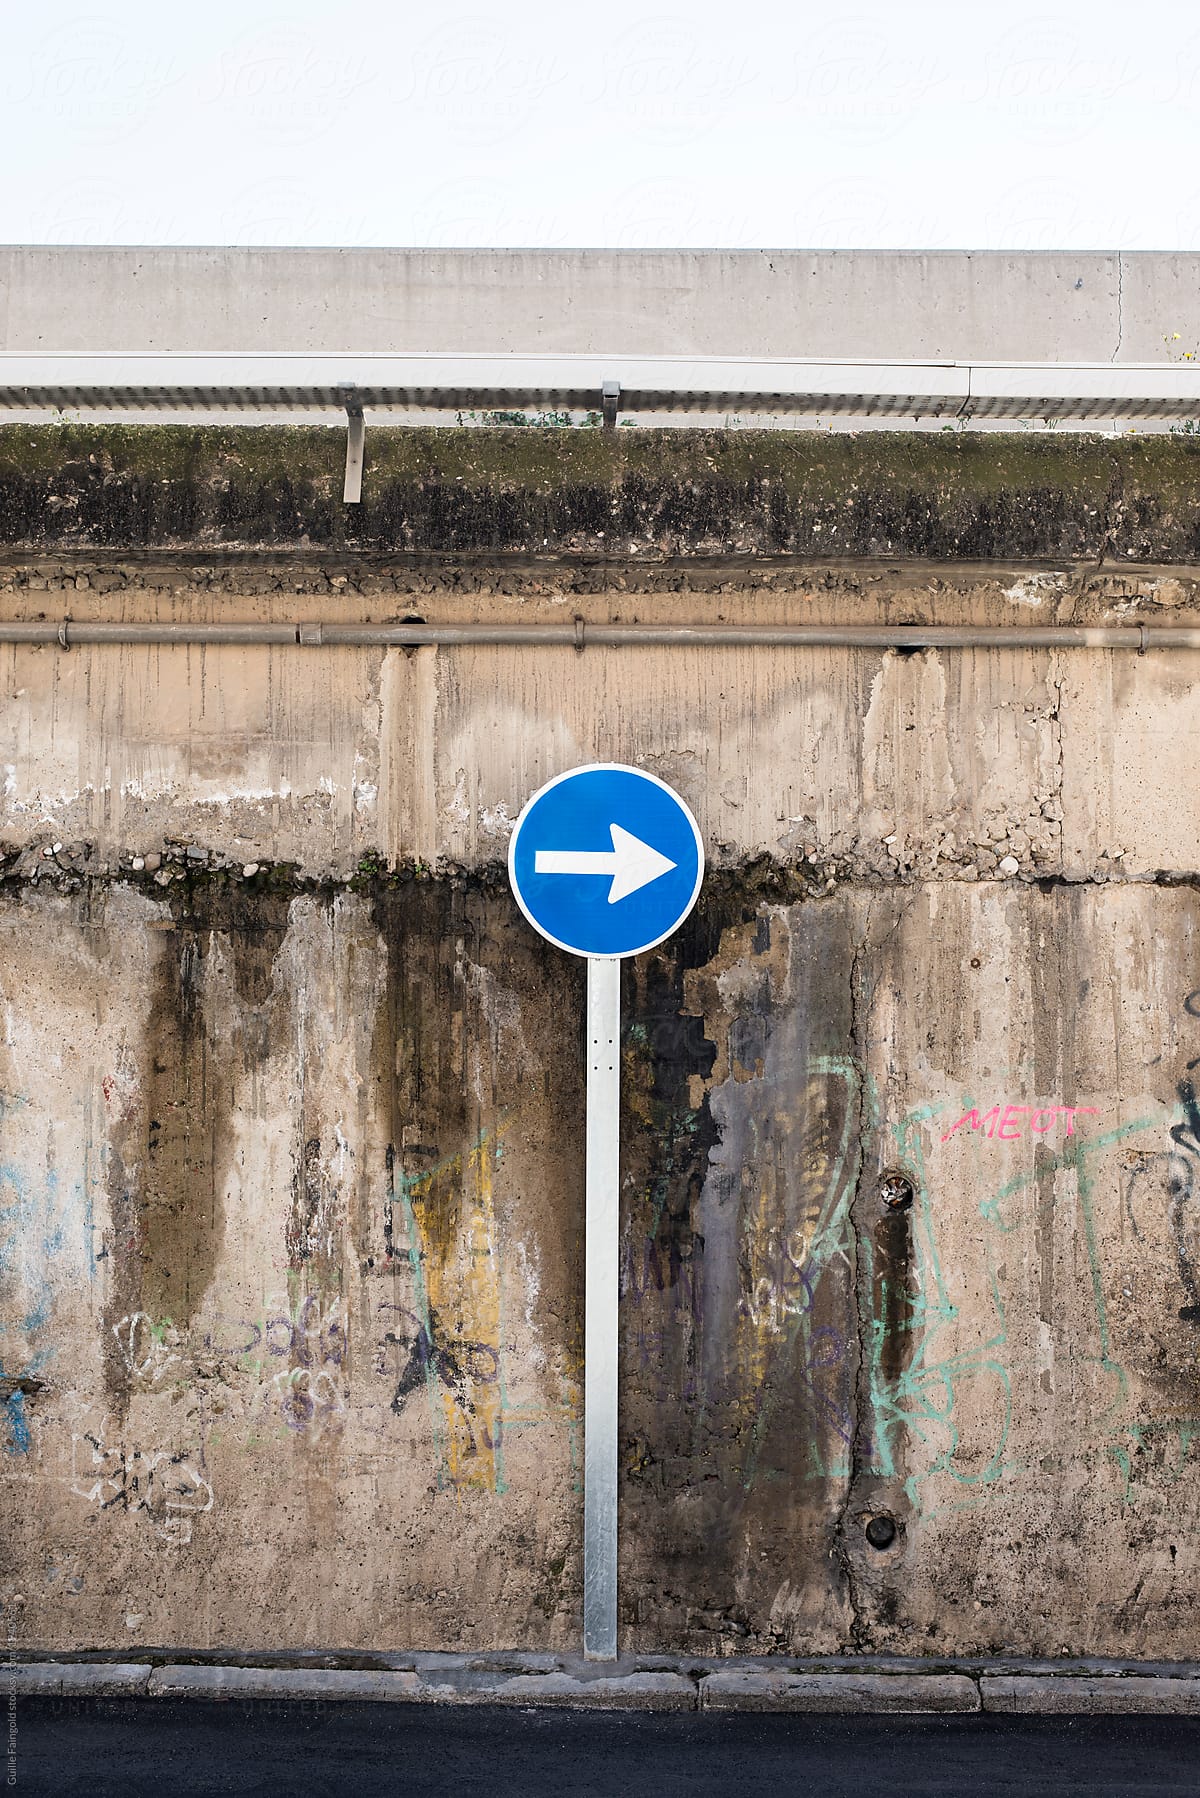 Road sign showing direction against grunge wall